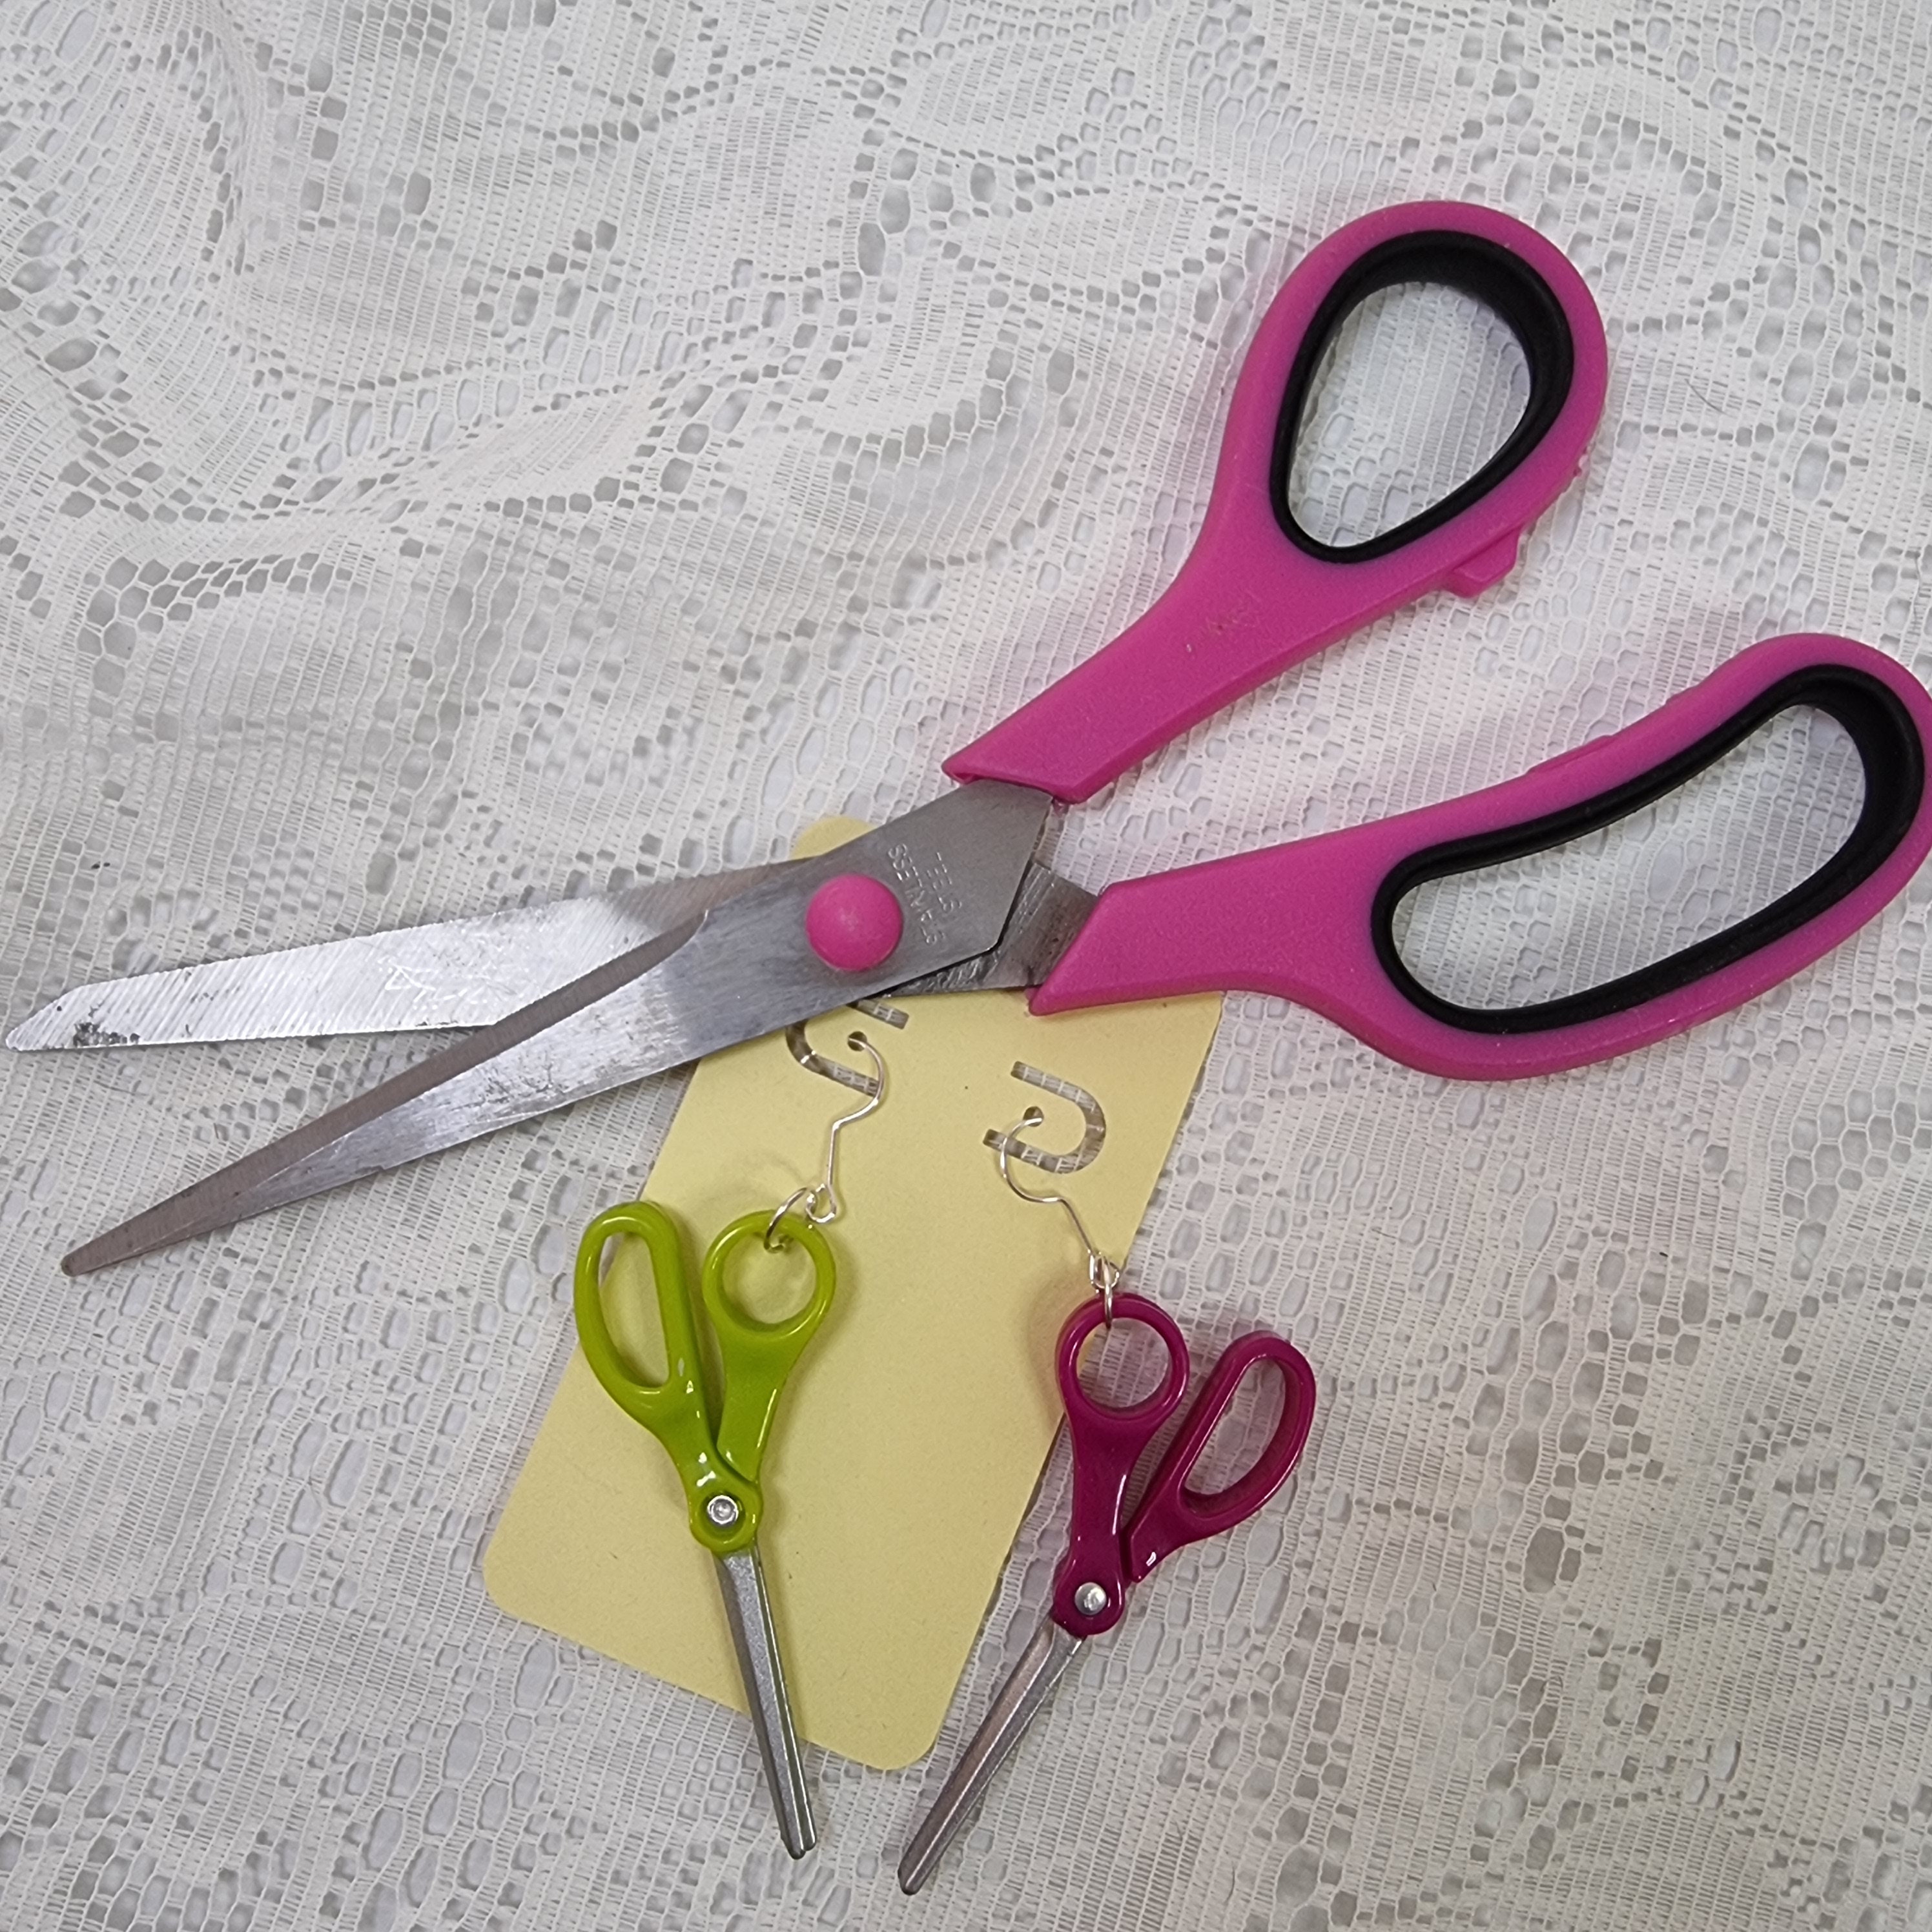 Travel Mini Super Snips Scissors With Protector Over Point Yellow Pink  Green ONE COUNT 